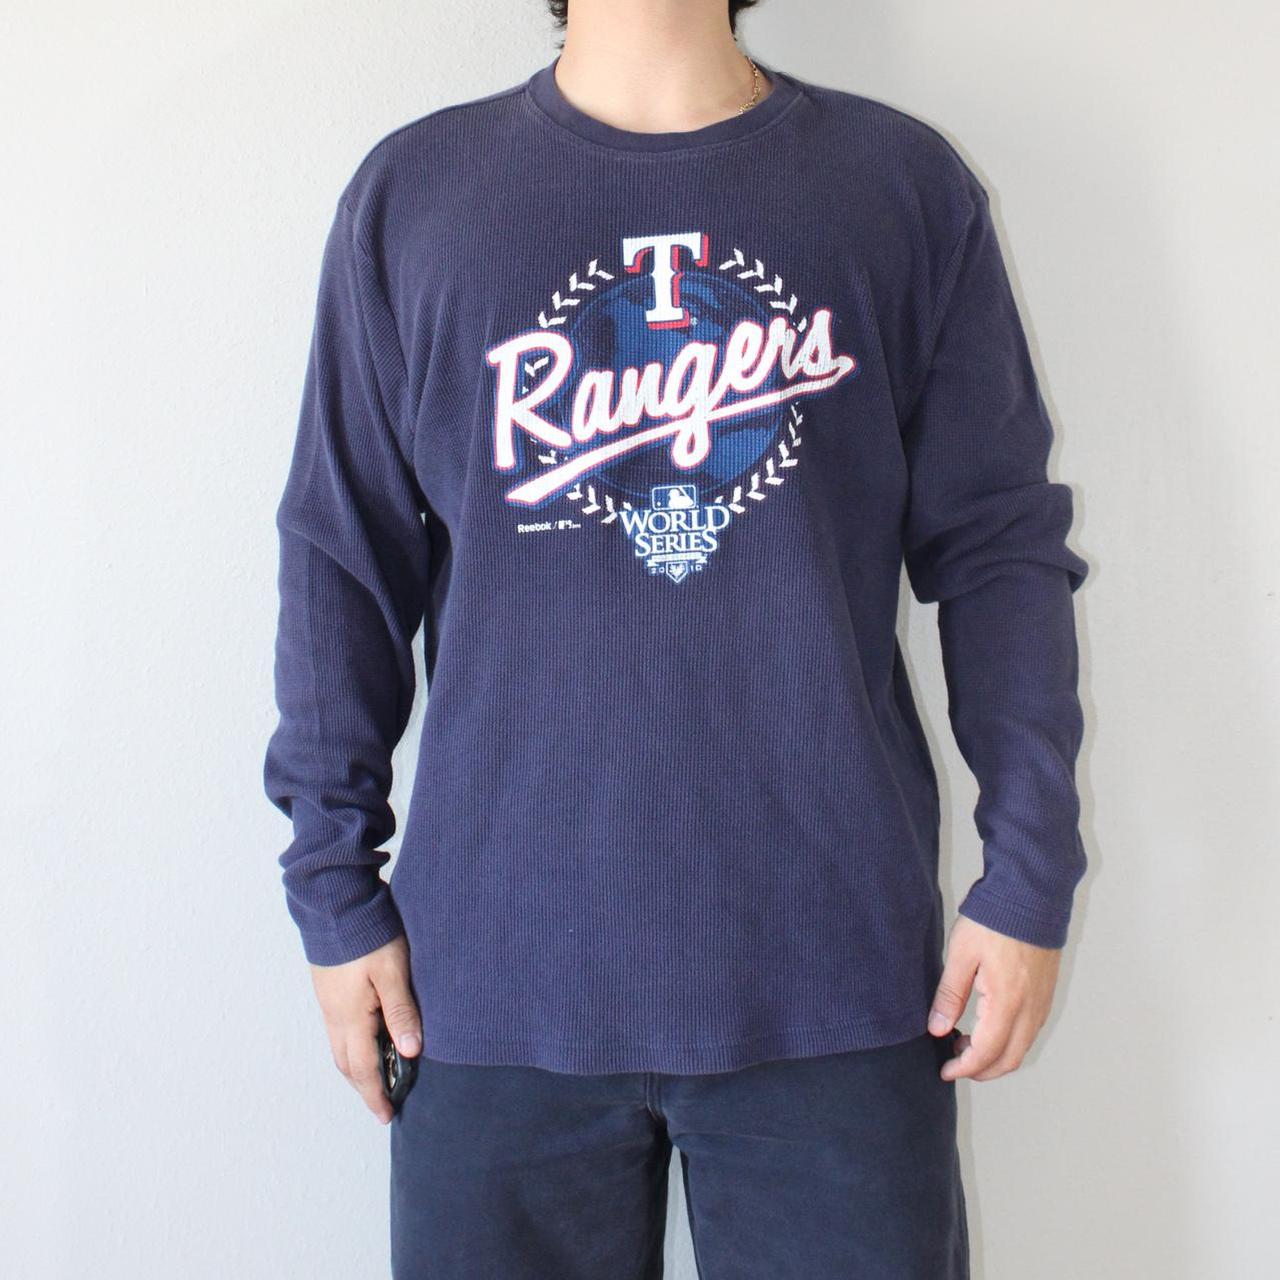 Product Image 1 - Texas Rangers Thermal Shirt 

Excellent